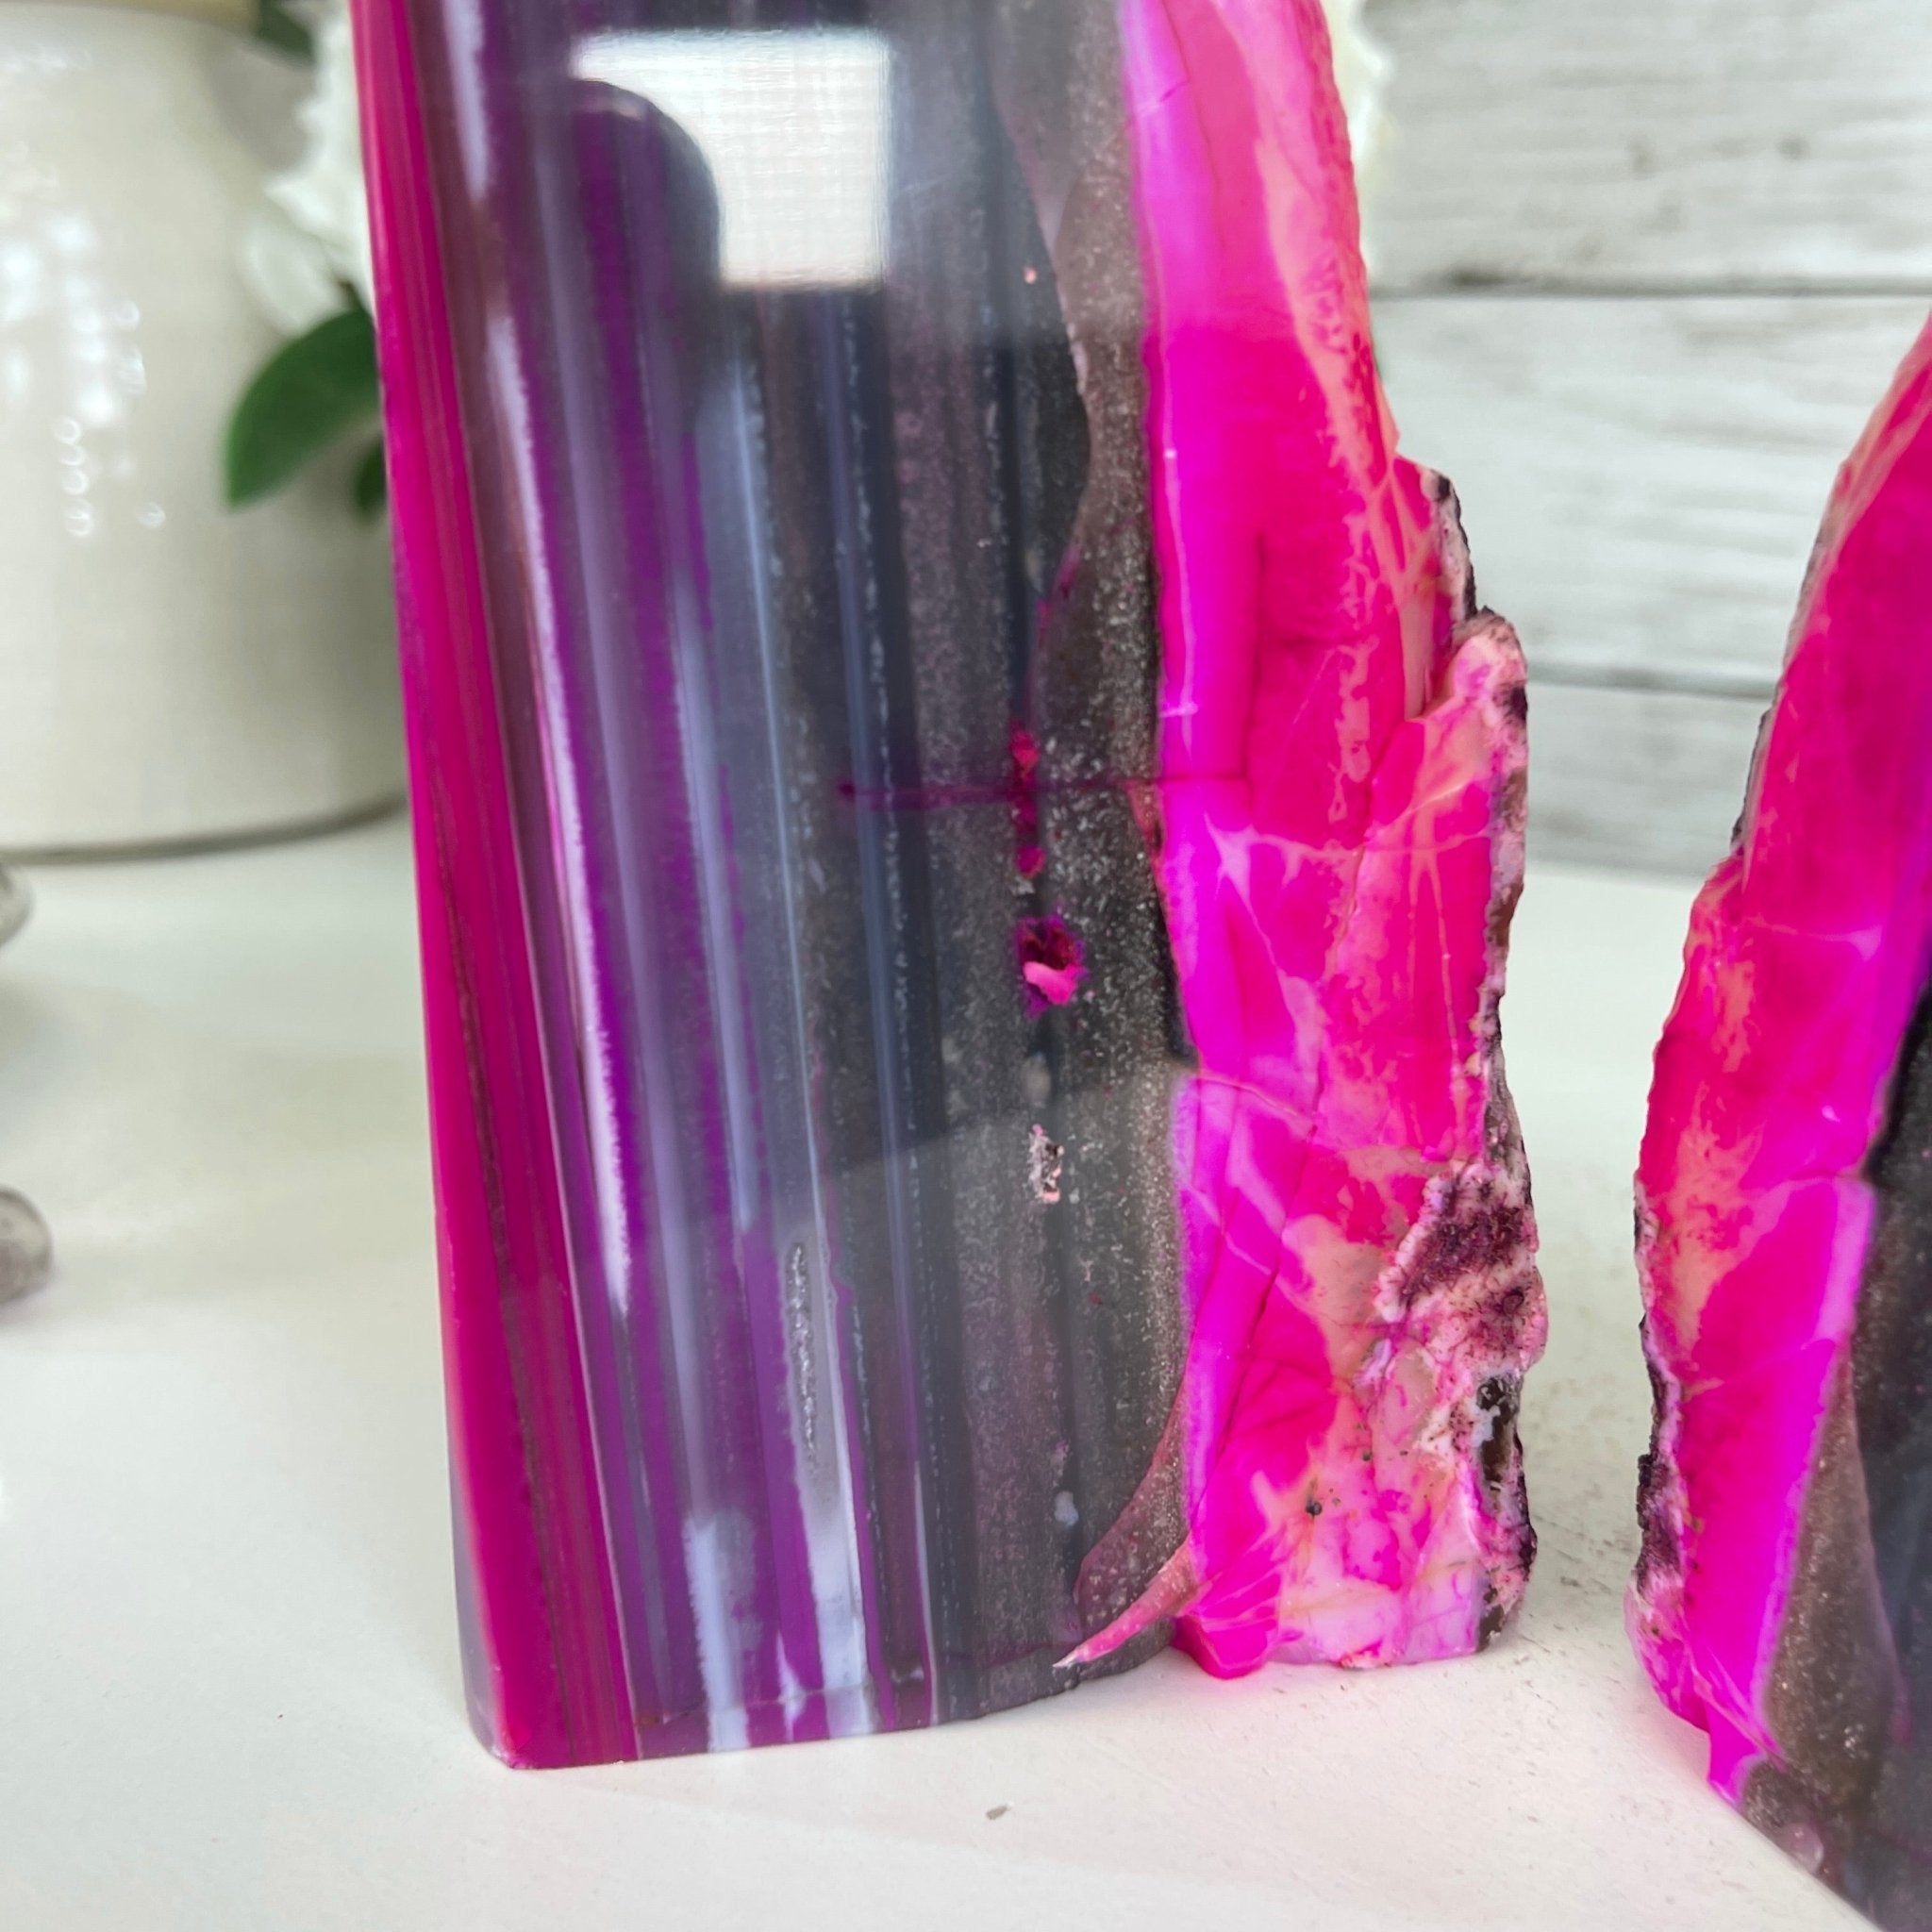 Pink Dyed Brazilian Agate Stone Bookends, 5.2" tall & 6.2 lbs #5151-0024 by Brazil Gems - Brazil GemsBrazil GemsPink Dyed Brazilian Agate Stone Bookends, 5.2" tall & 6.2 lbs #5151-0024 by Brazil GemsBookends5151PA-024